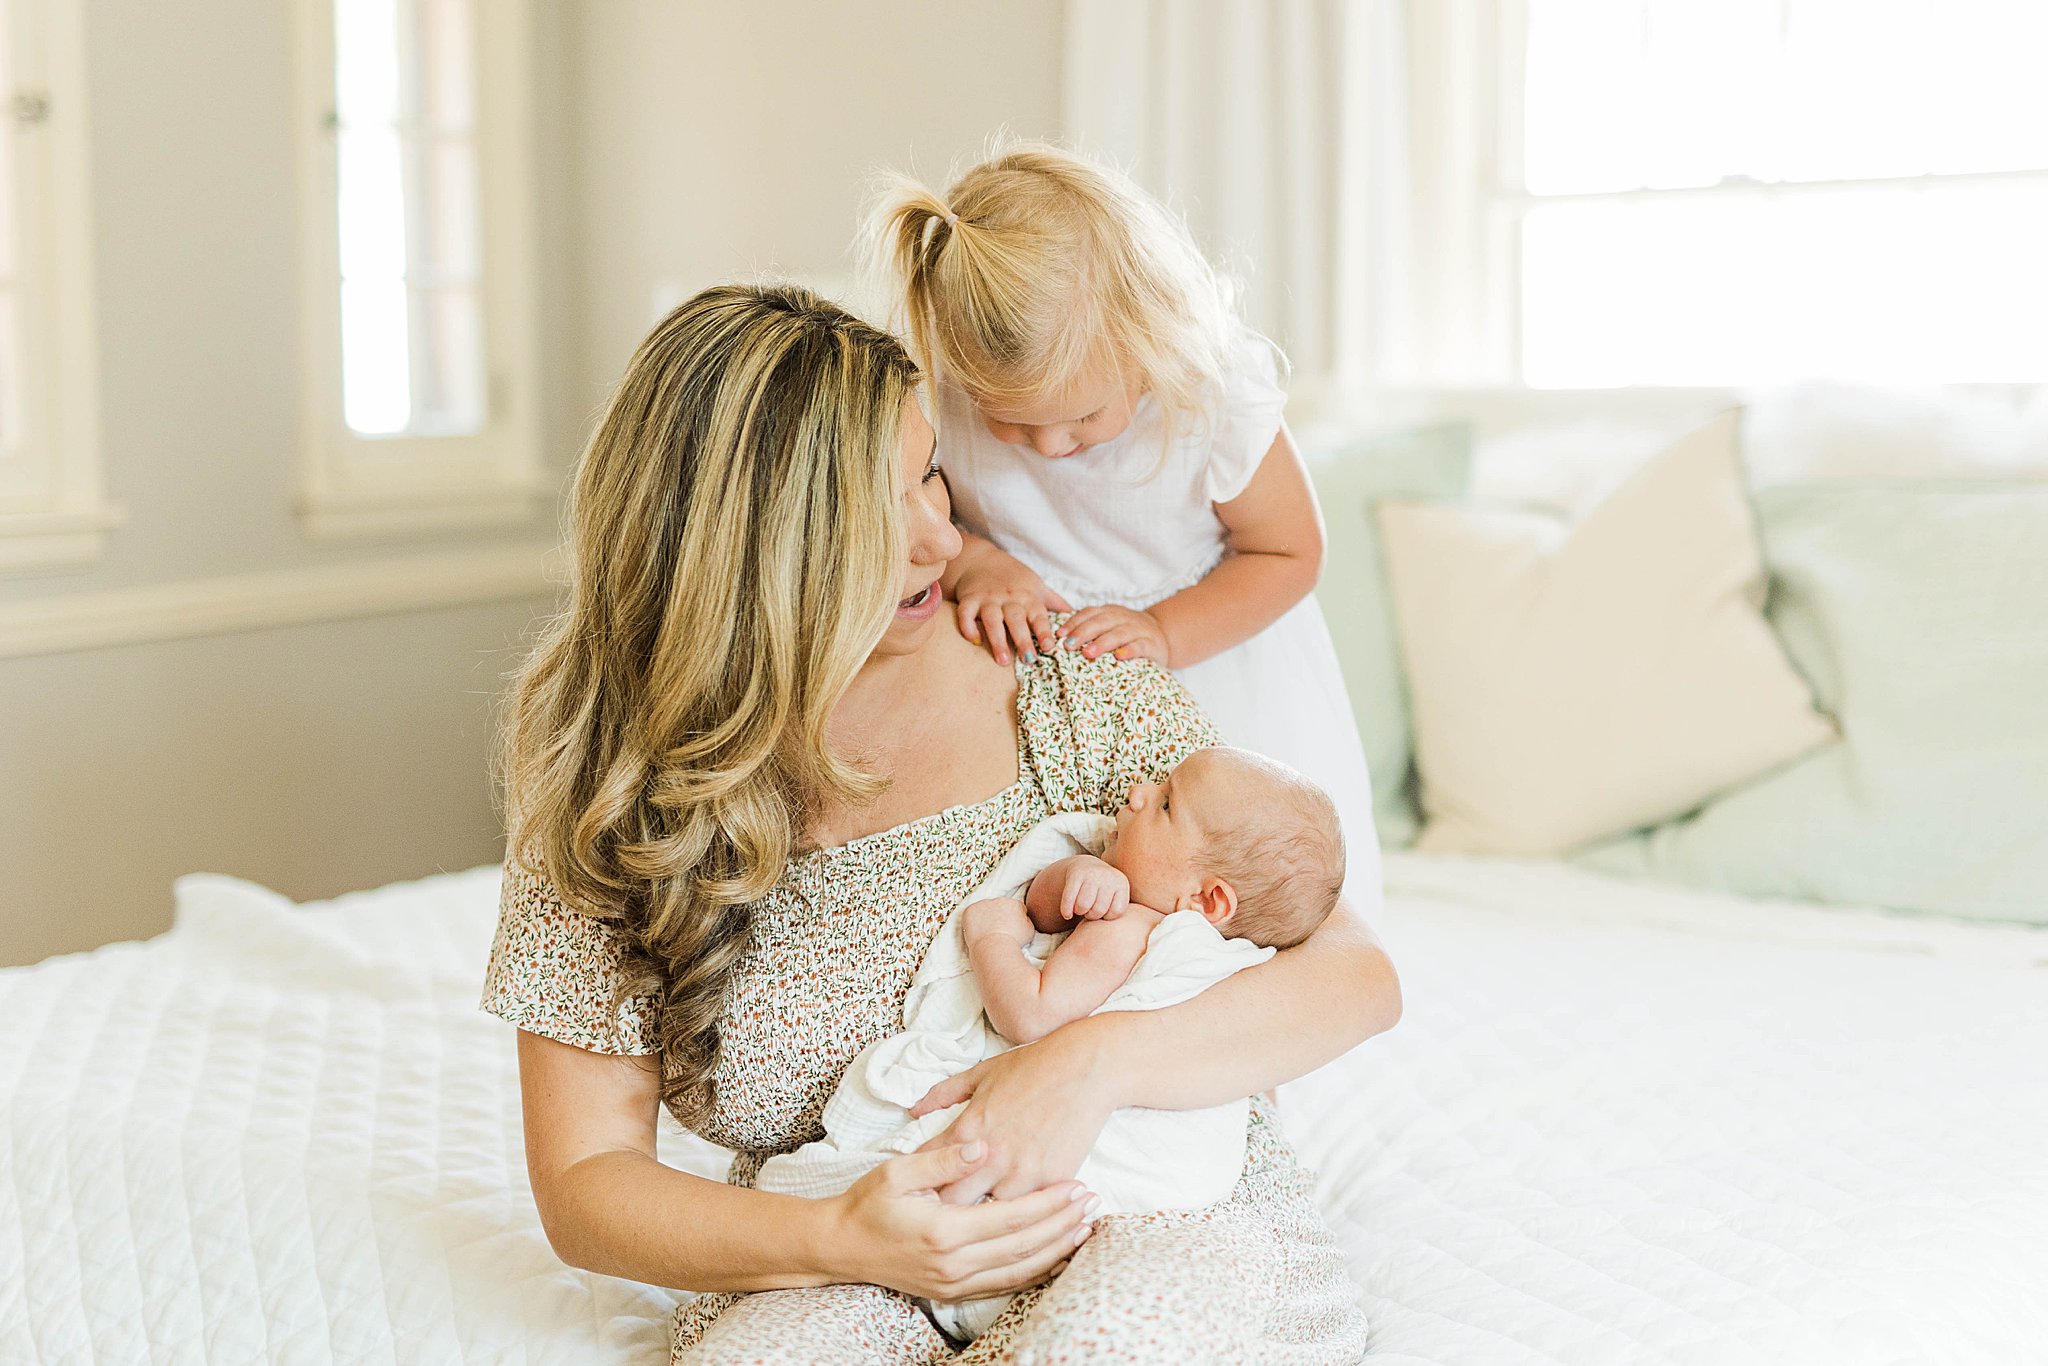 Mom holding baby while toddler looks at baby during MN newborn photographer session.